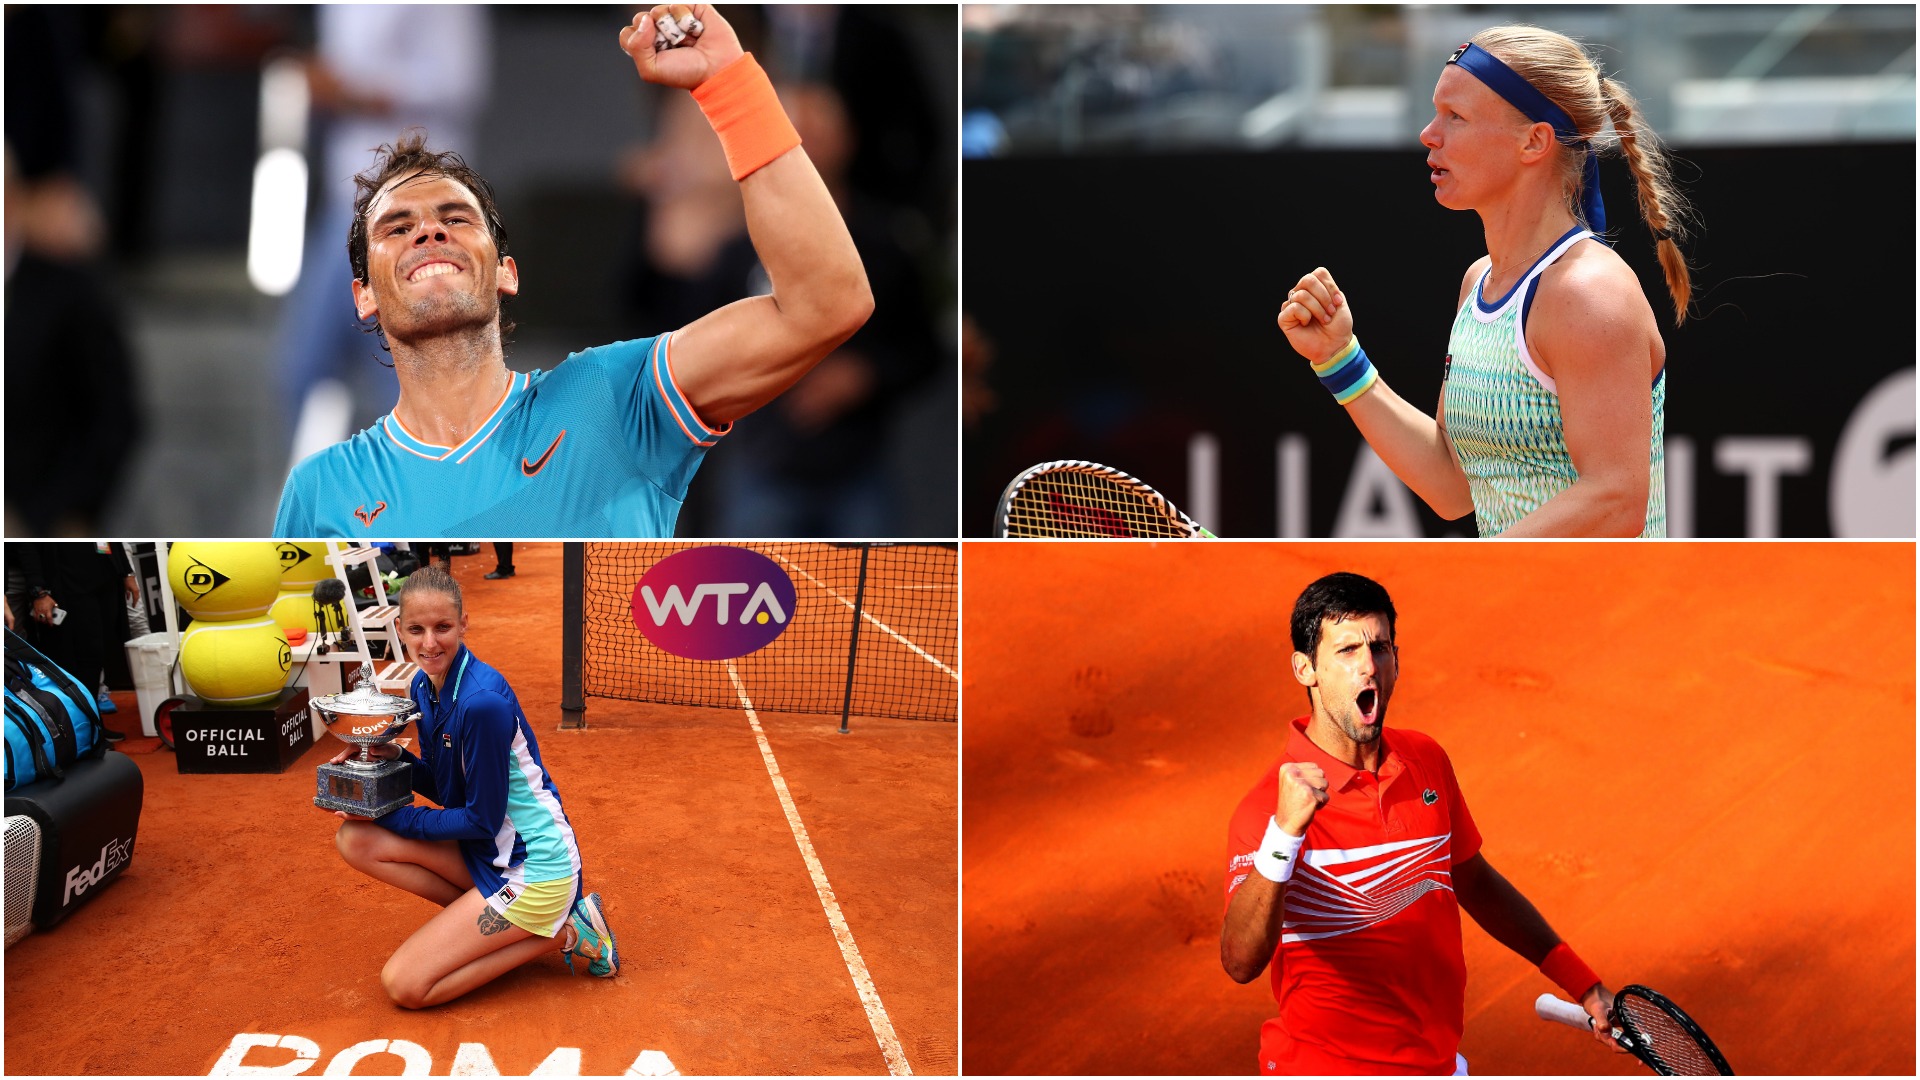 Three Omnisport writers pick their tips for success at the French Open and take a look at potential dark horses.